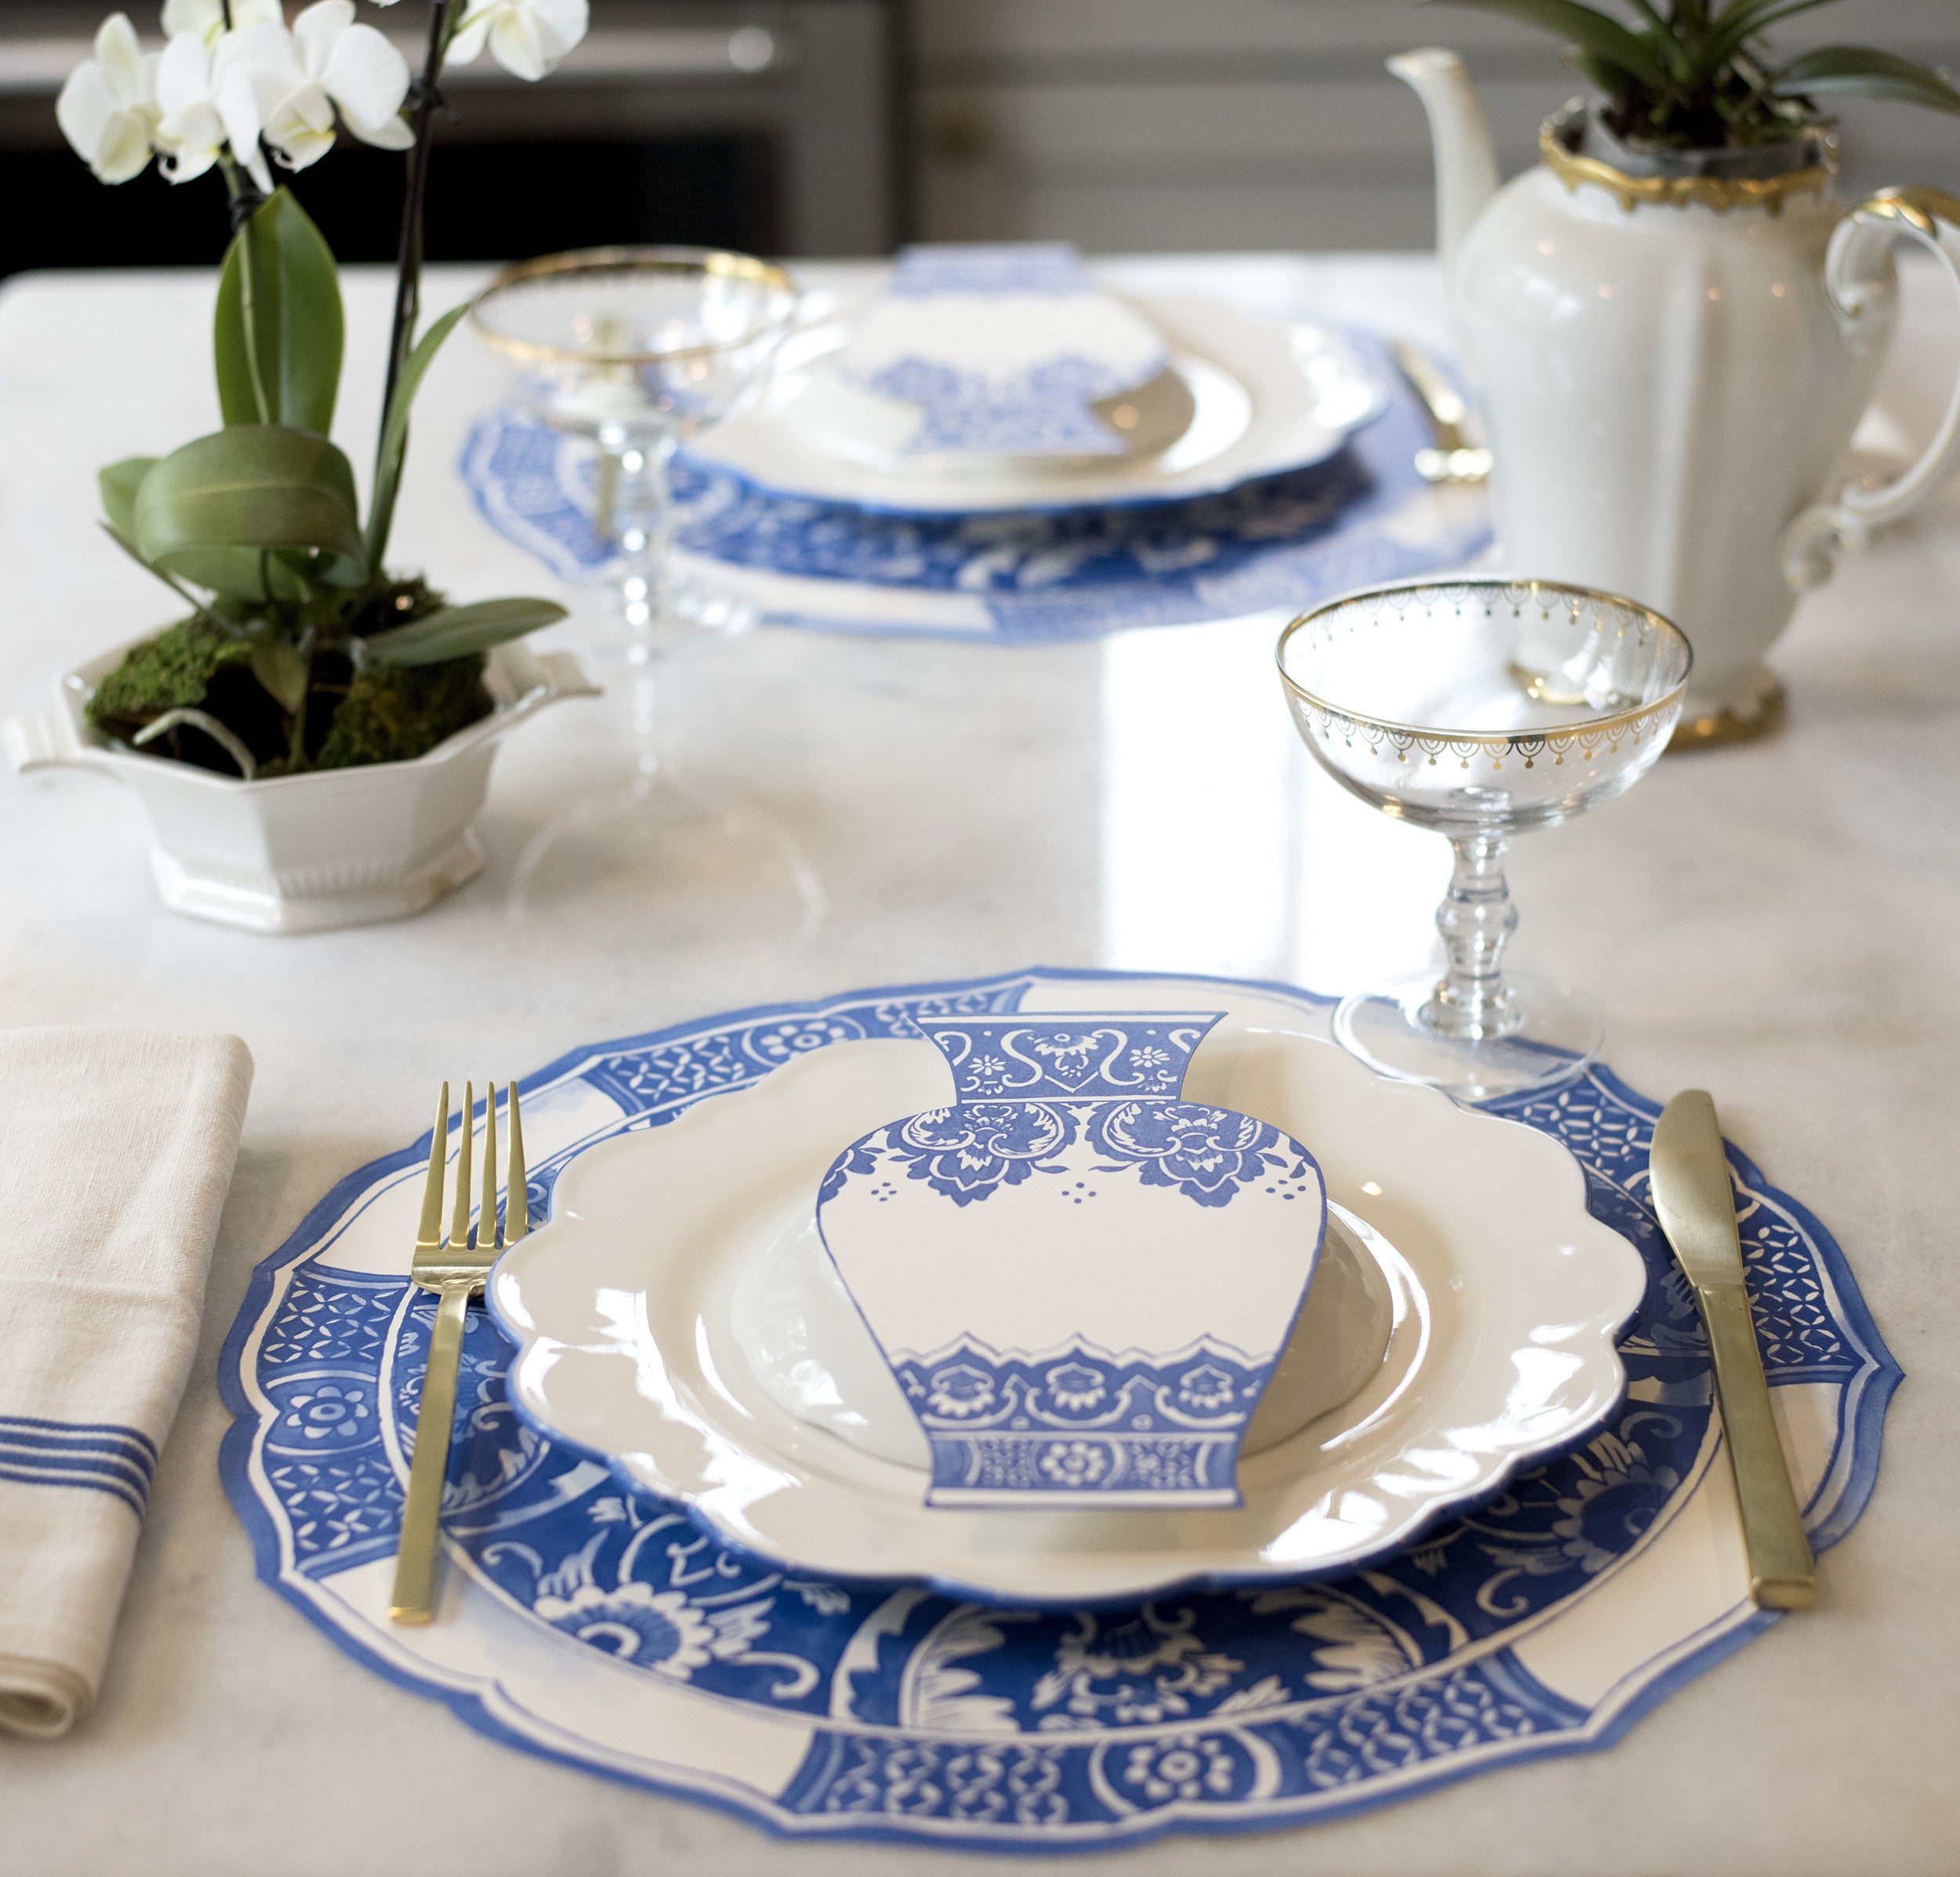 An elegant table setting featuring Chine Blue Vase Table Accents resting on each plate.